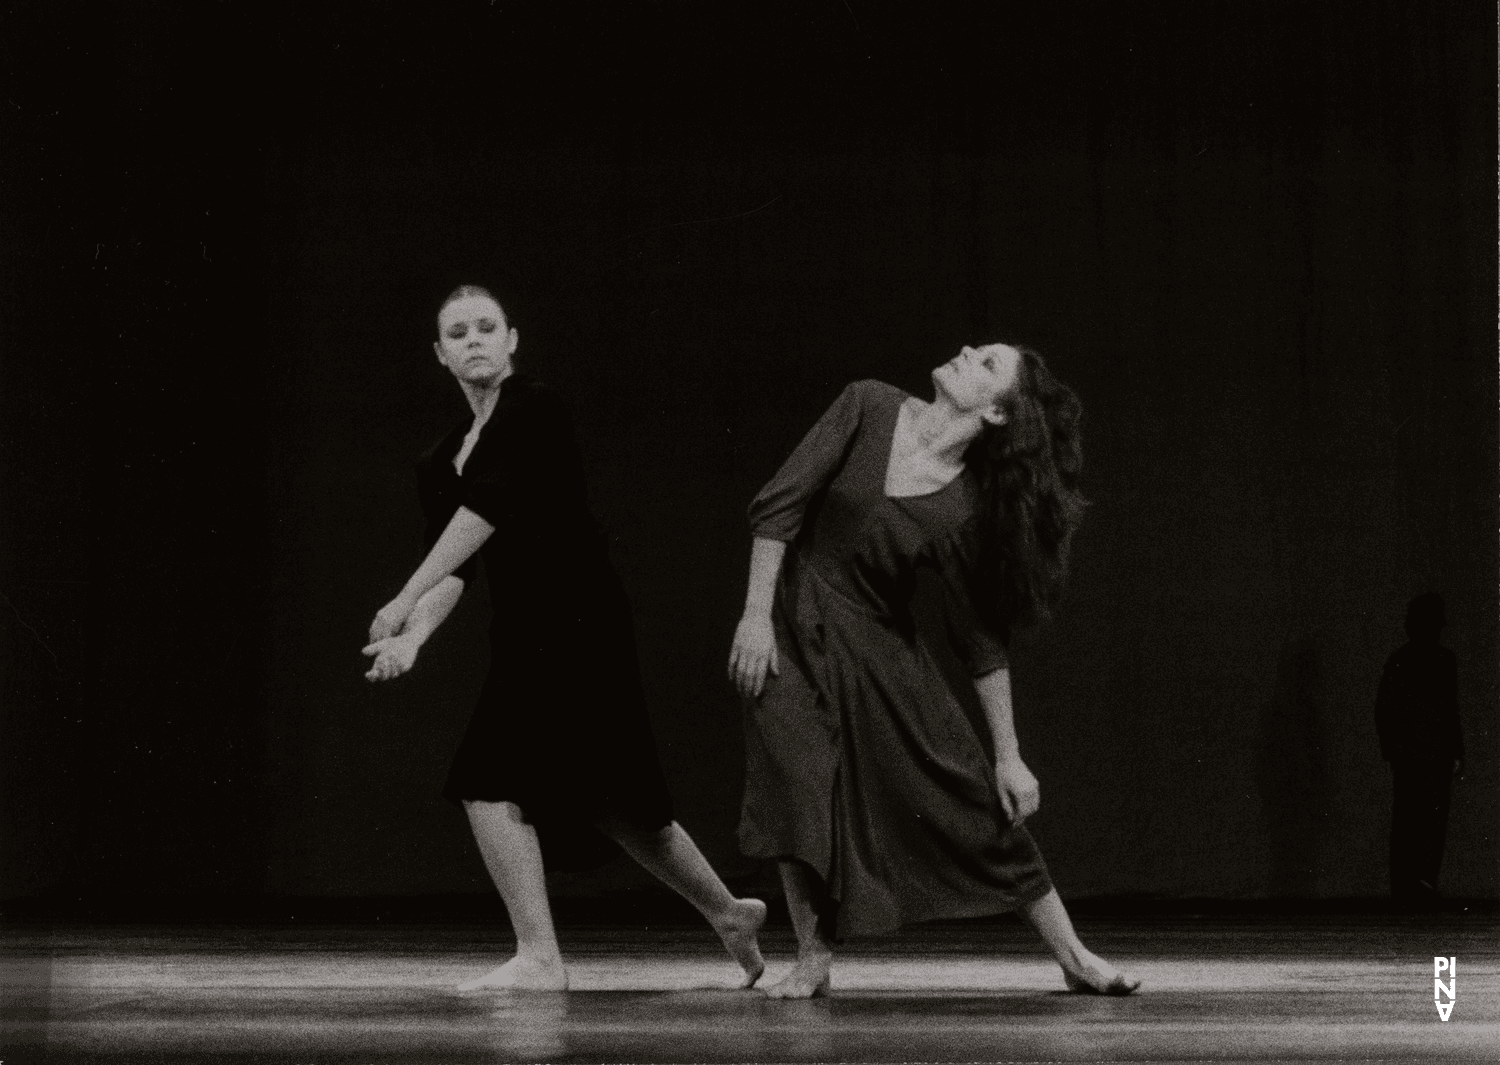 Malou Airaudo and Josephine Ann Endicott in “Adagio – Five Songs by Gustav Mahler” by Pina Bausch